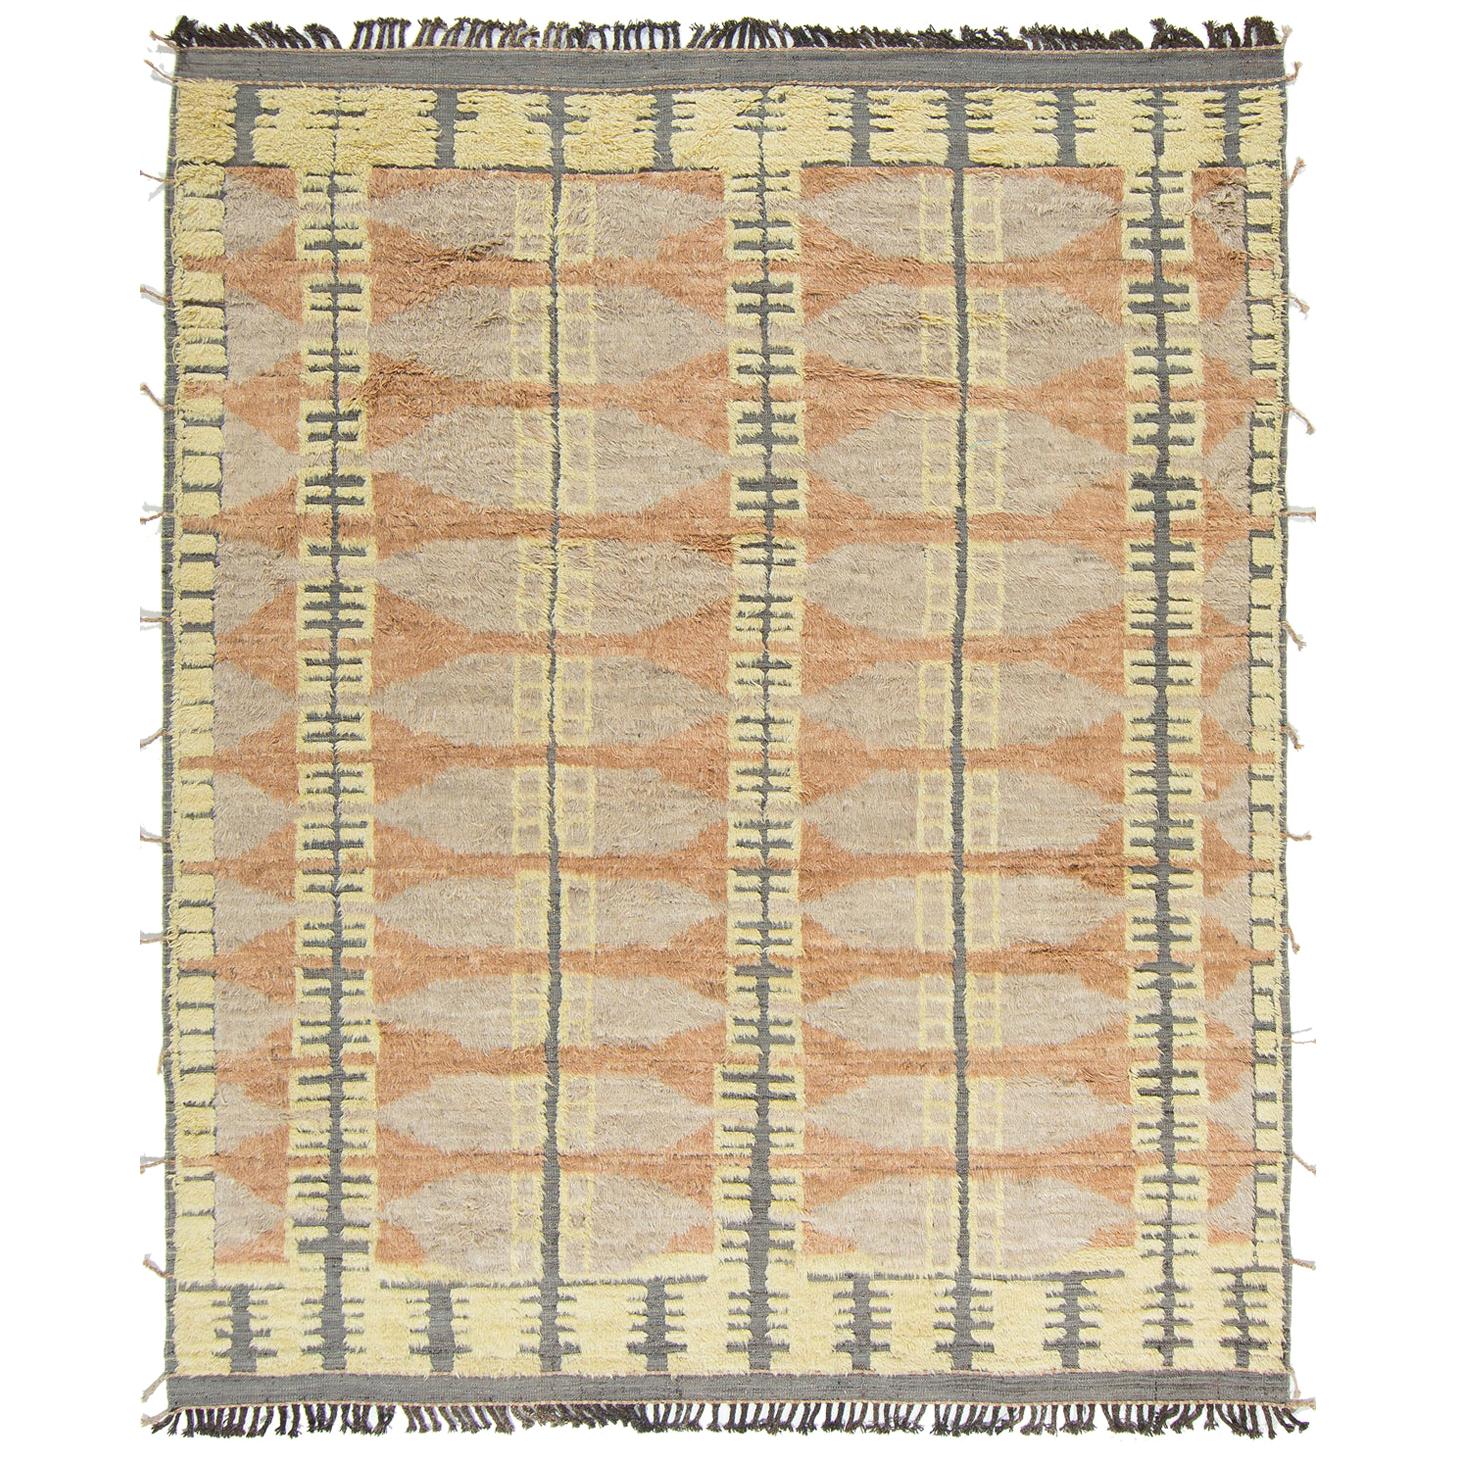 Thus, Kust Collection by Mehraban Rugs